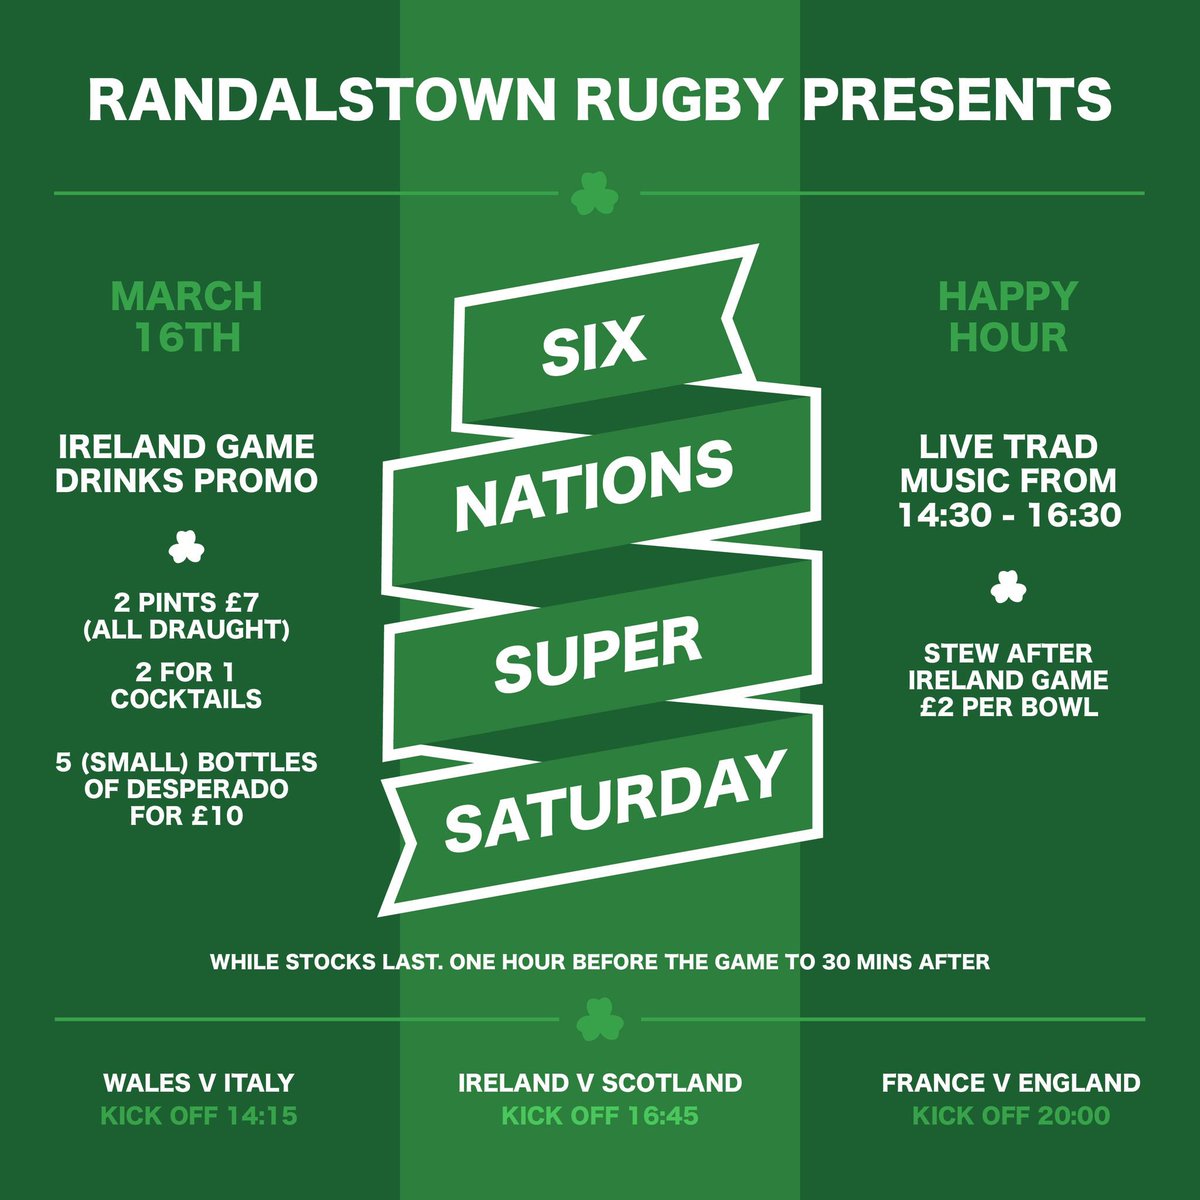 1 more sleep 😍 Super Saturday is back tomorrow and it’s an action packed day As well as all the 6 Nations action, we have live traditional music Don’t forget to get your free tickets here: randalstown.rugby/event/super-sa…